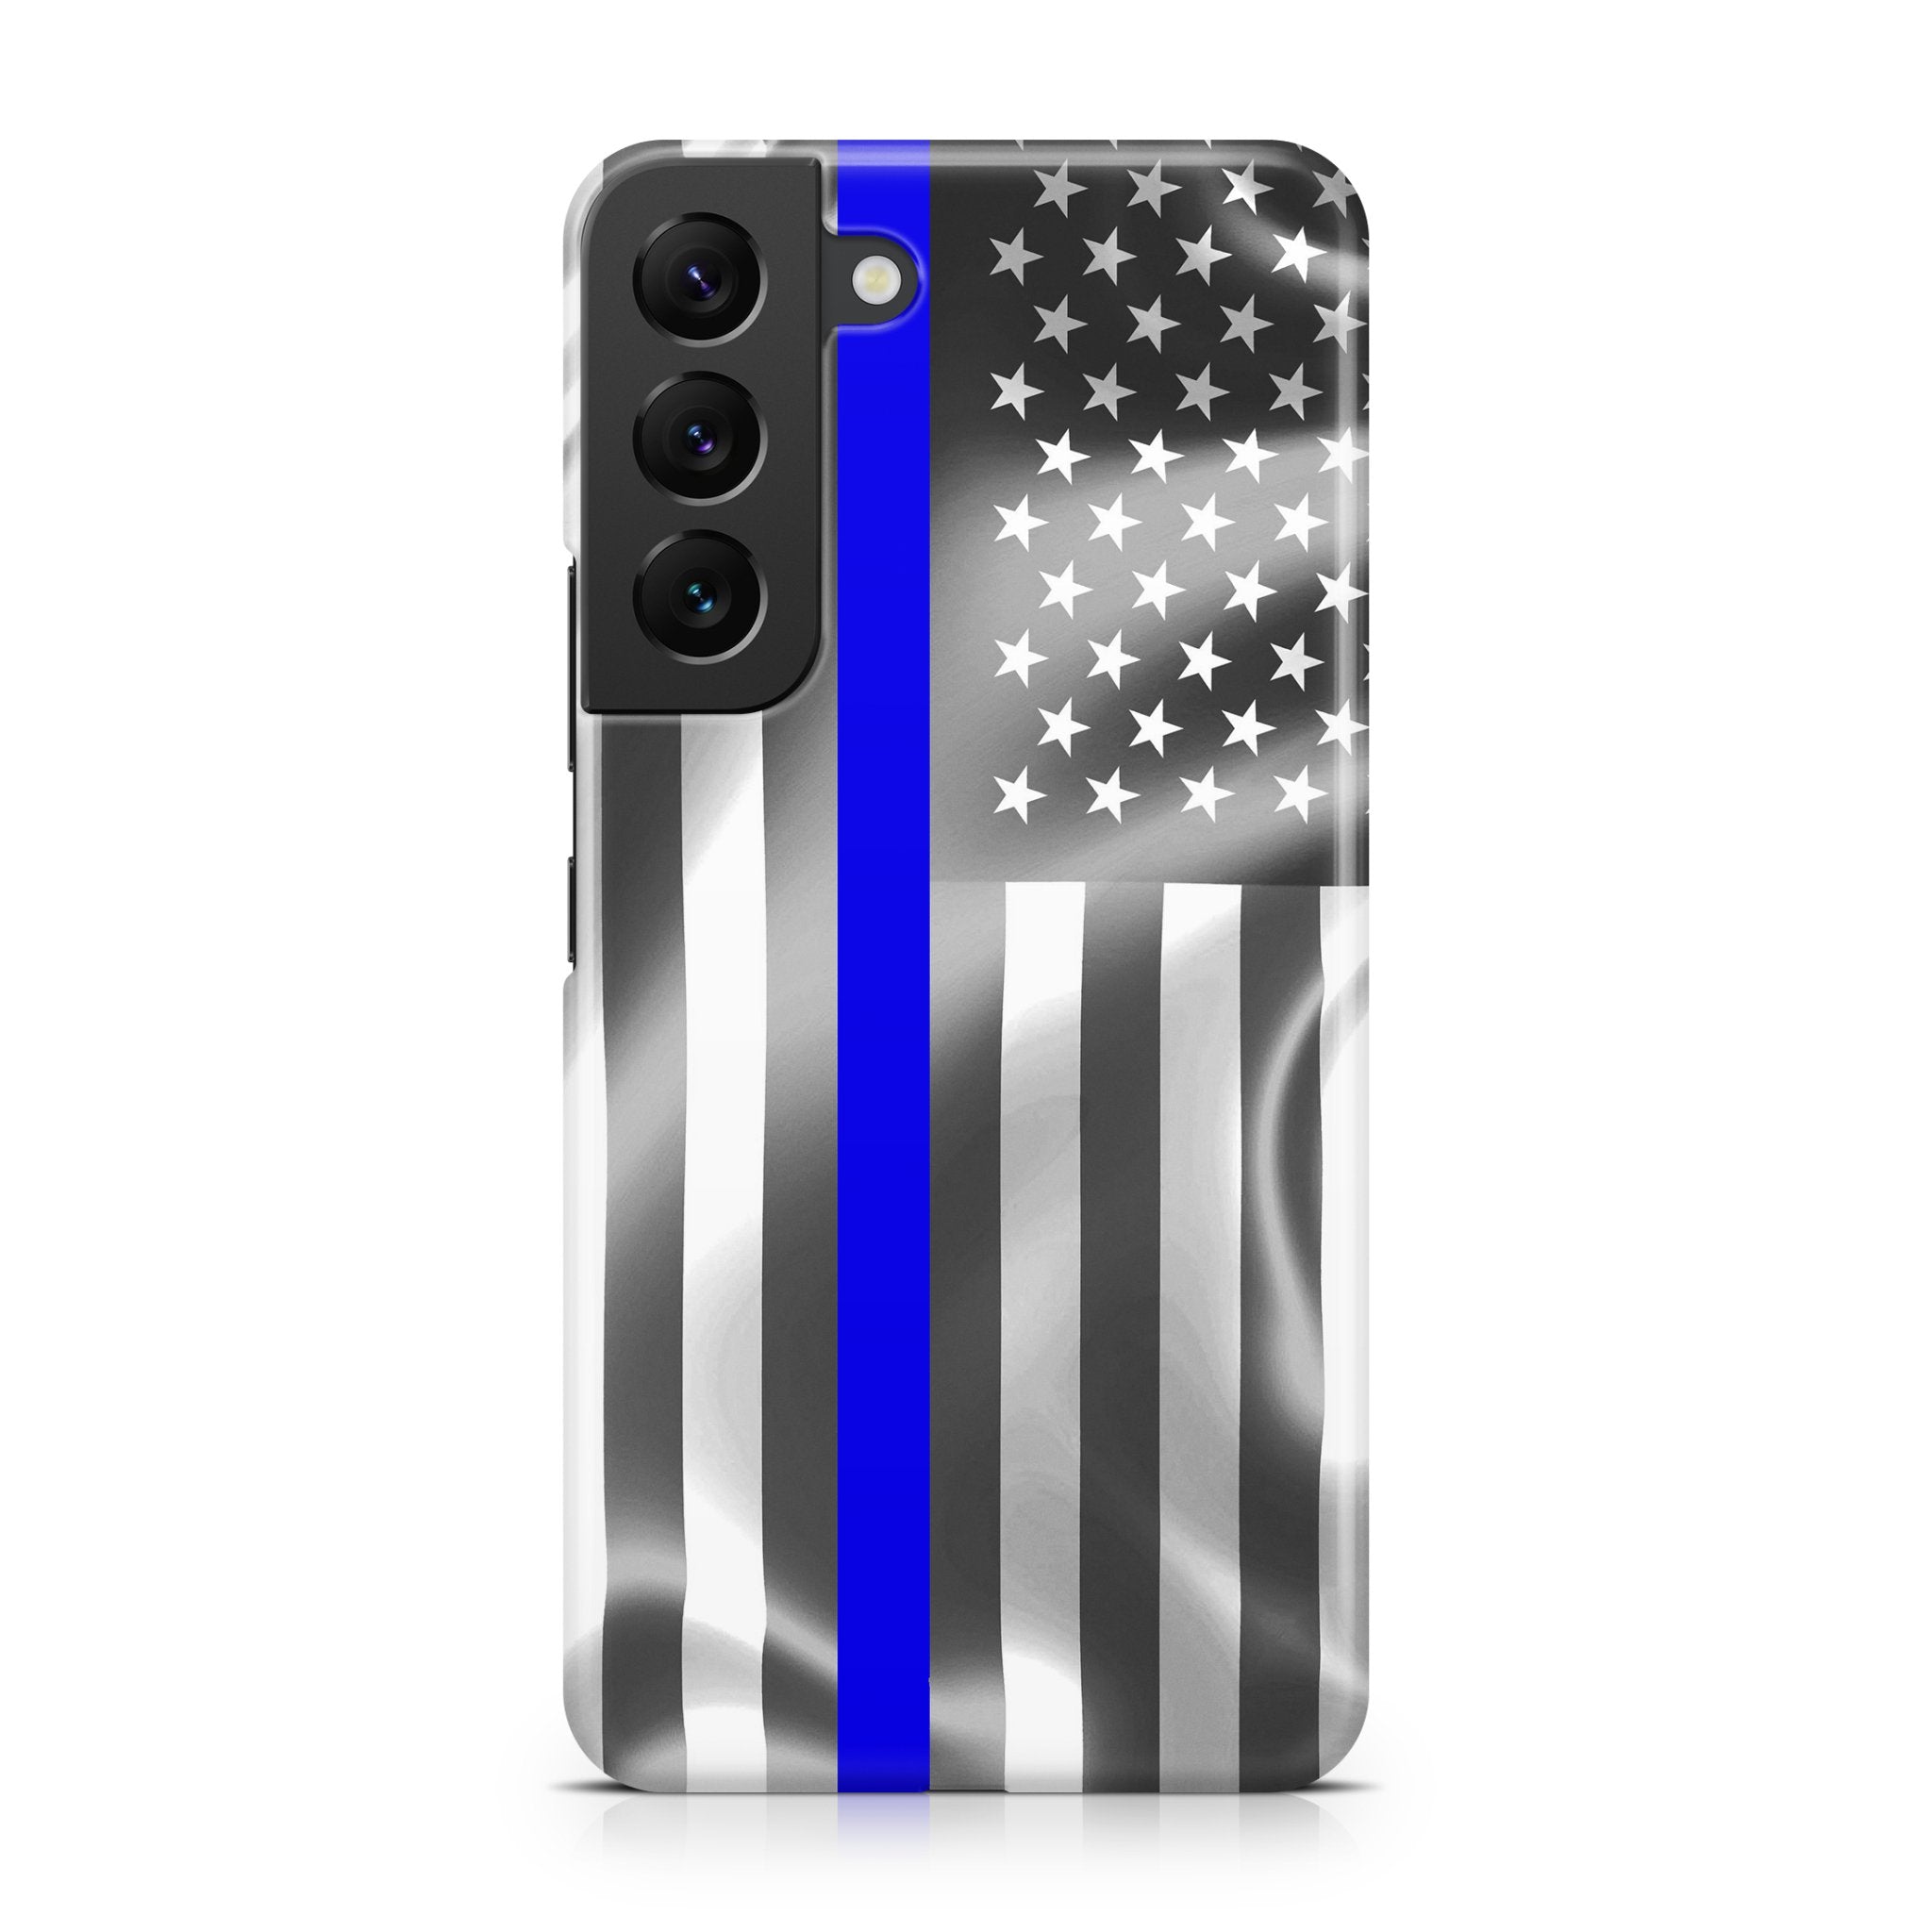 Thin Blue Line - Samsung phone case designs by CaseSwagger